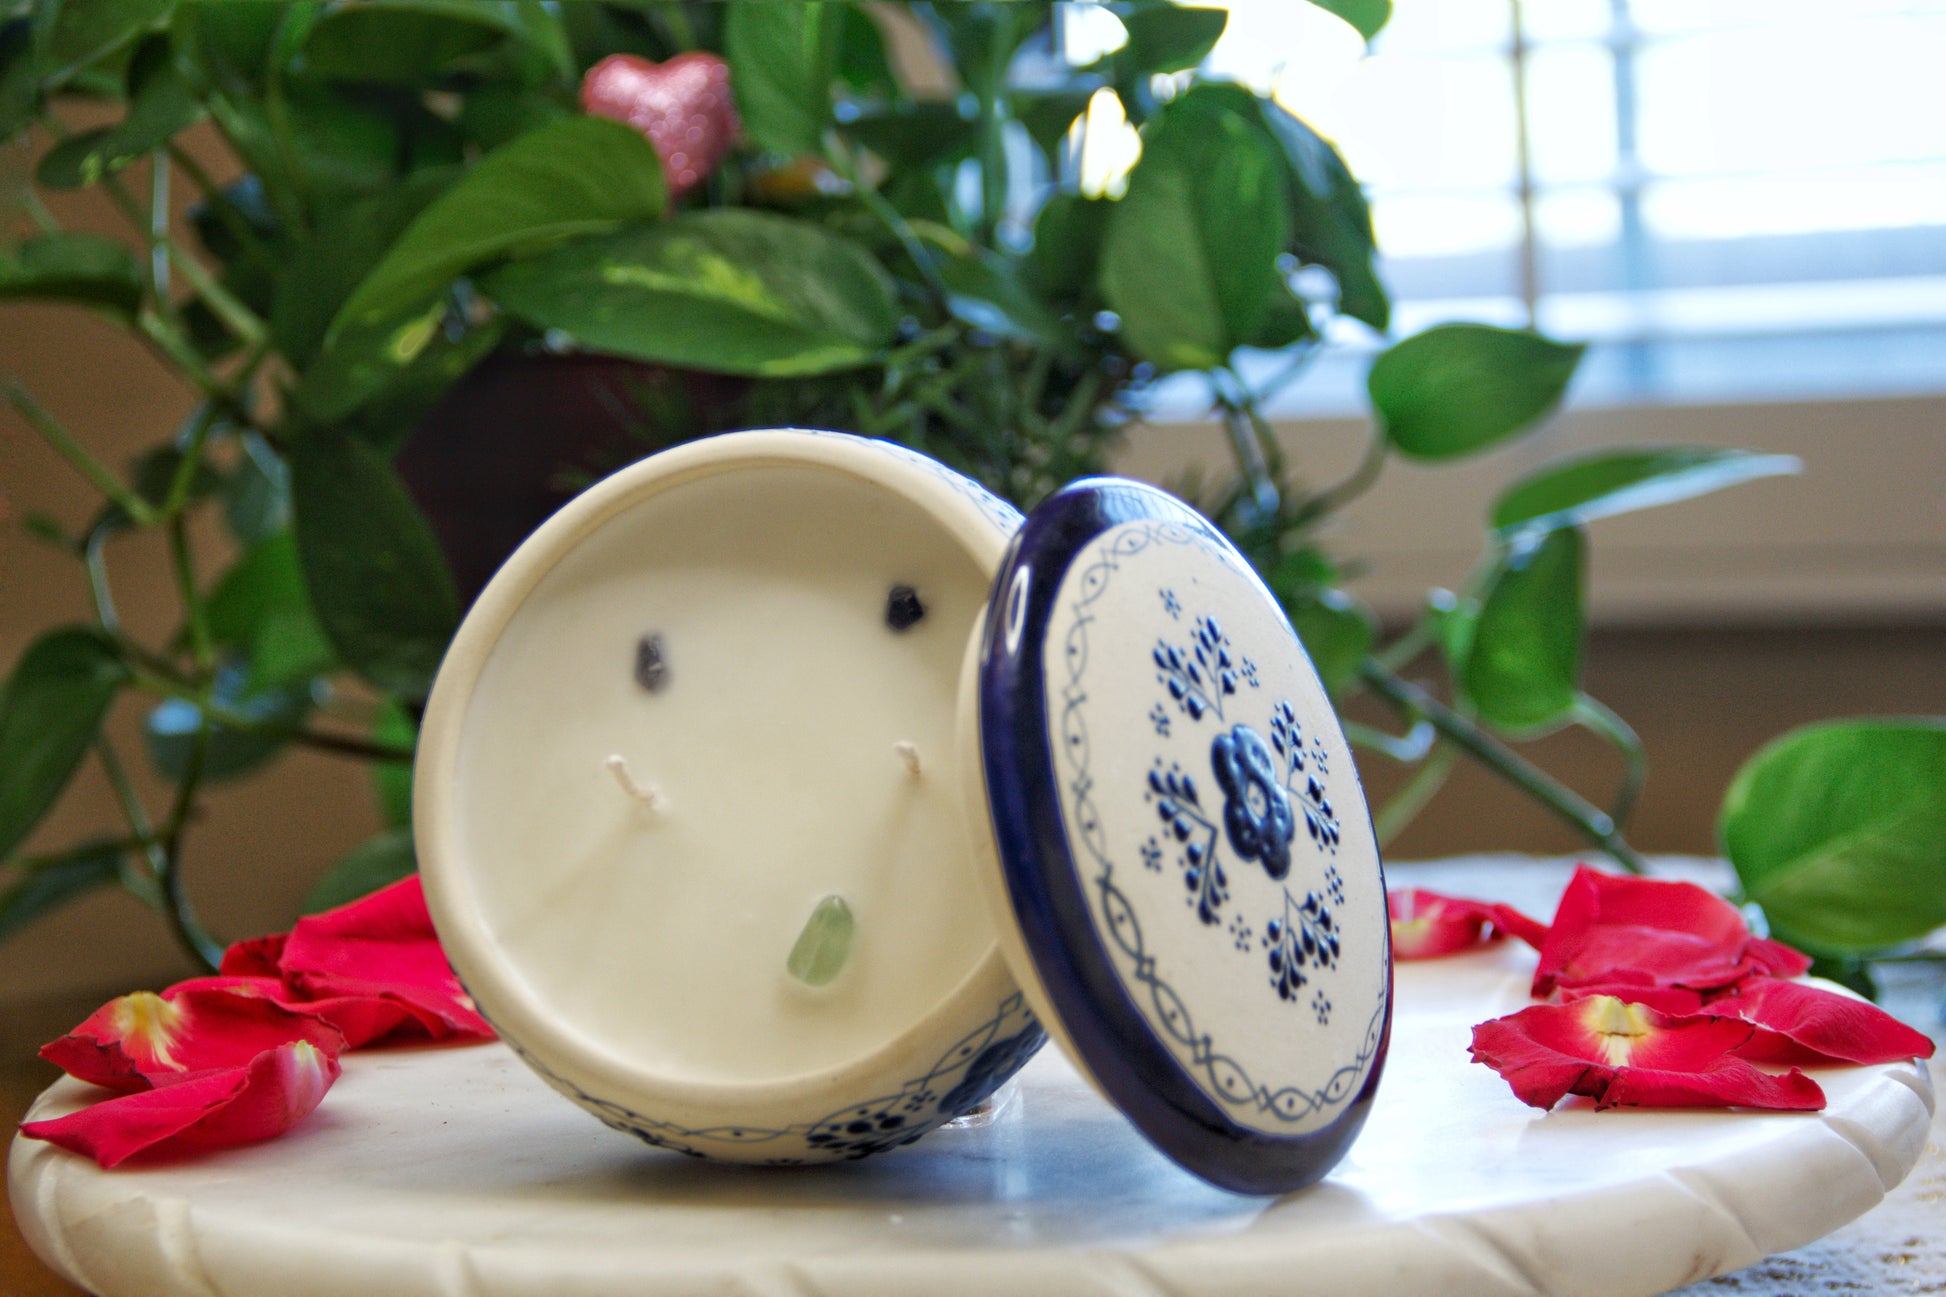 top view of a handmade artisanal candle in a blue floral design talavera with an open lid. Custom made by Artisan in Mexico. 100% All Natural Soy Candle. Reuse the talavera as home decor or storage.